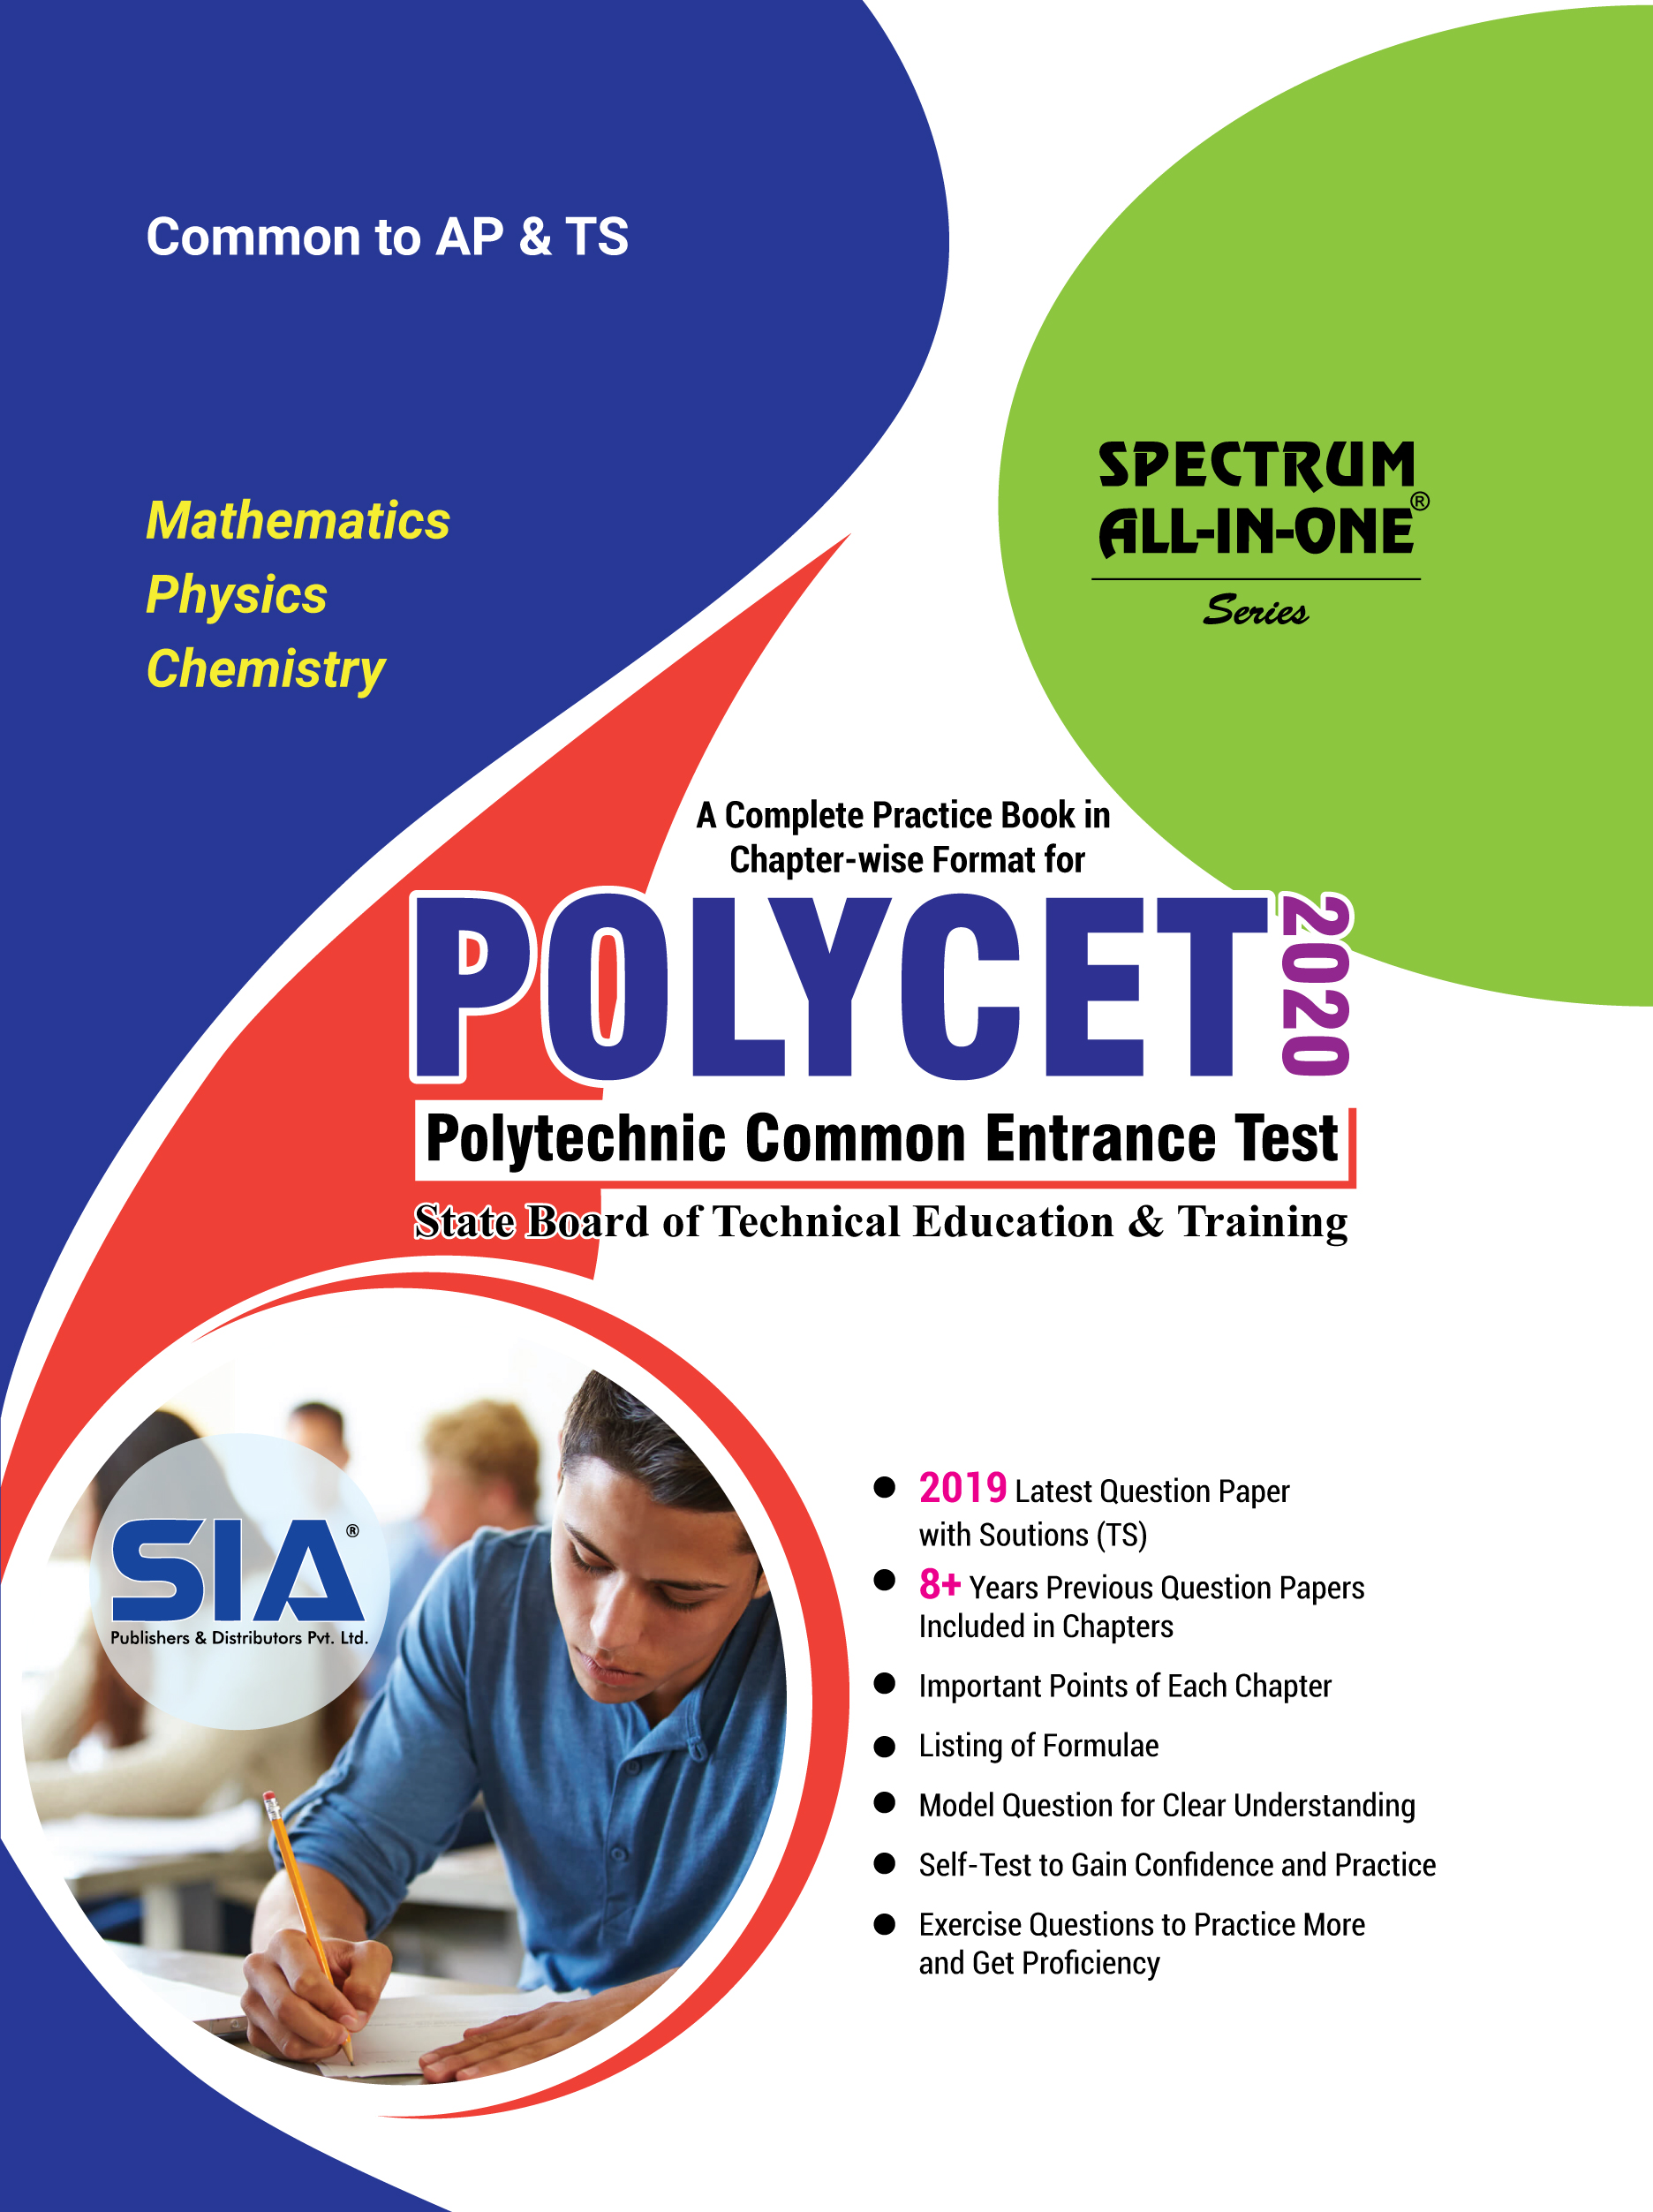 competitive academic polycet ap exams